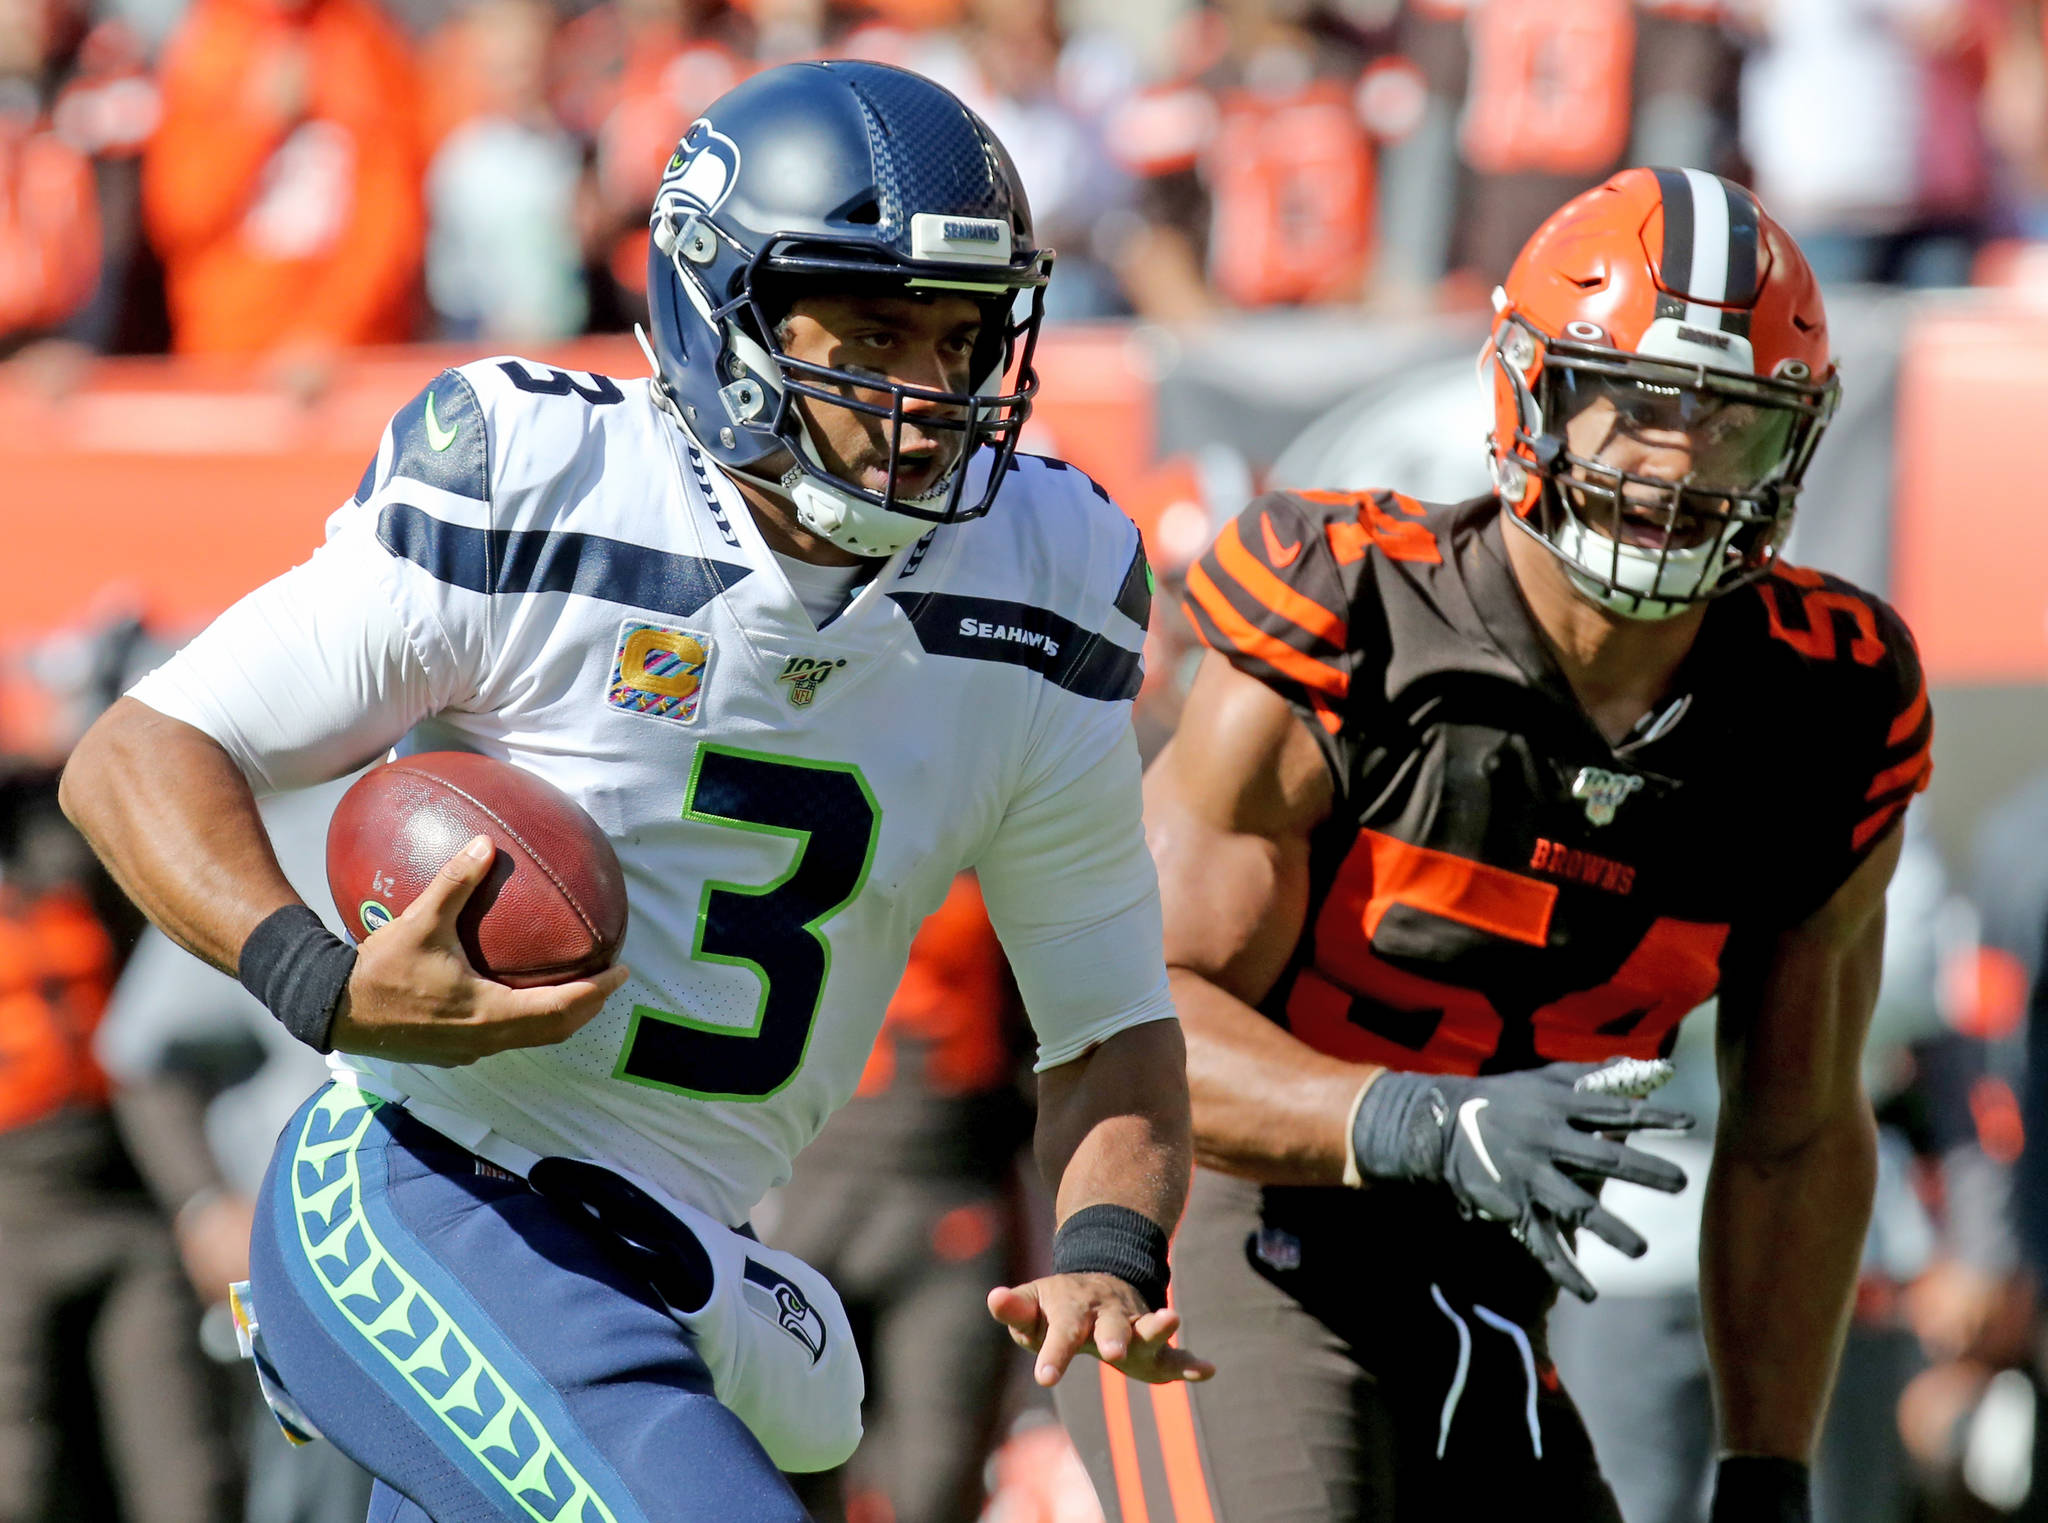 Seattle Seahawks quarterback Russell Wilson (3) runs for a touchdown with Cleveland Browns defensive end Olivier Vernon chasing him during the first quarter at FirstEnergy Stadium on Sunday. (Joshua Gunter| cleveland.com)